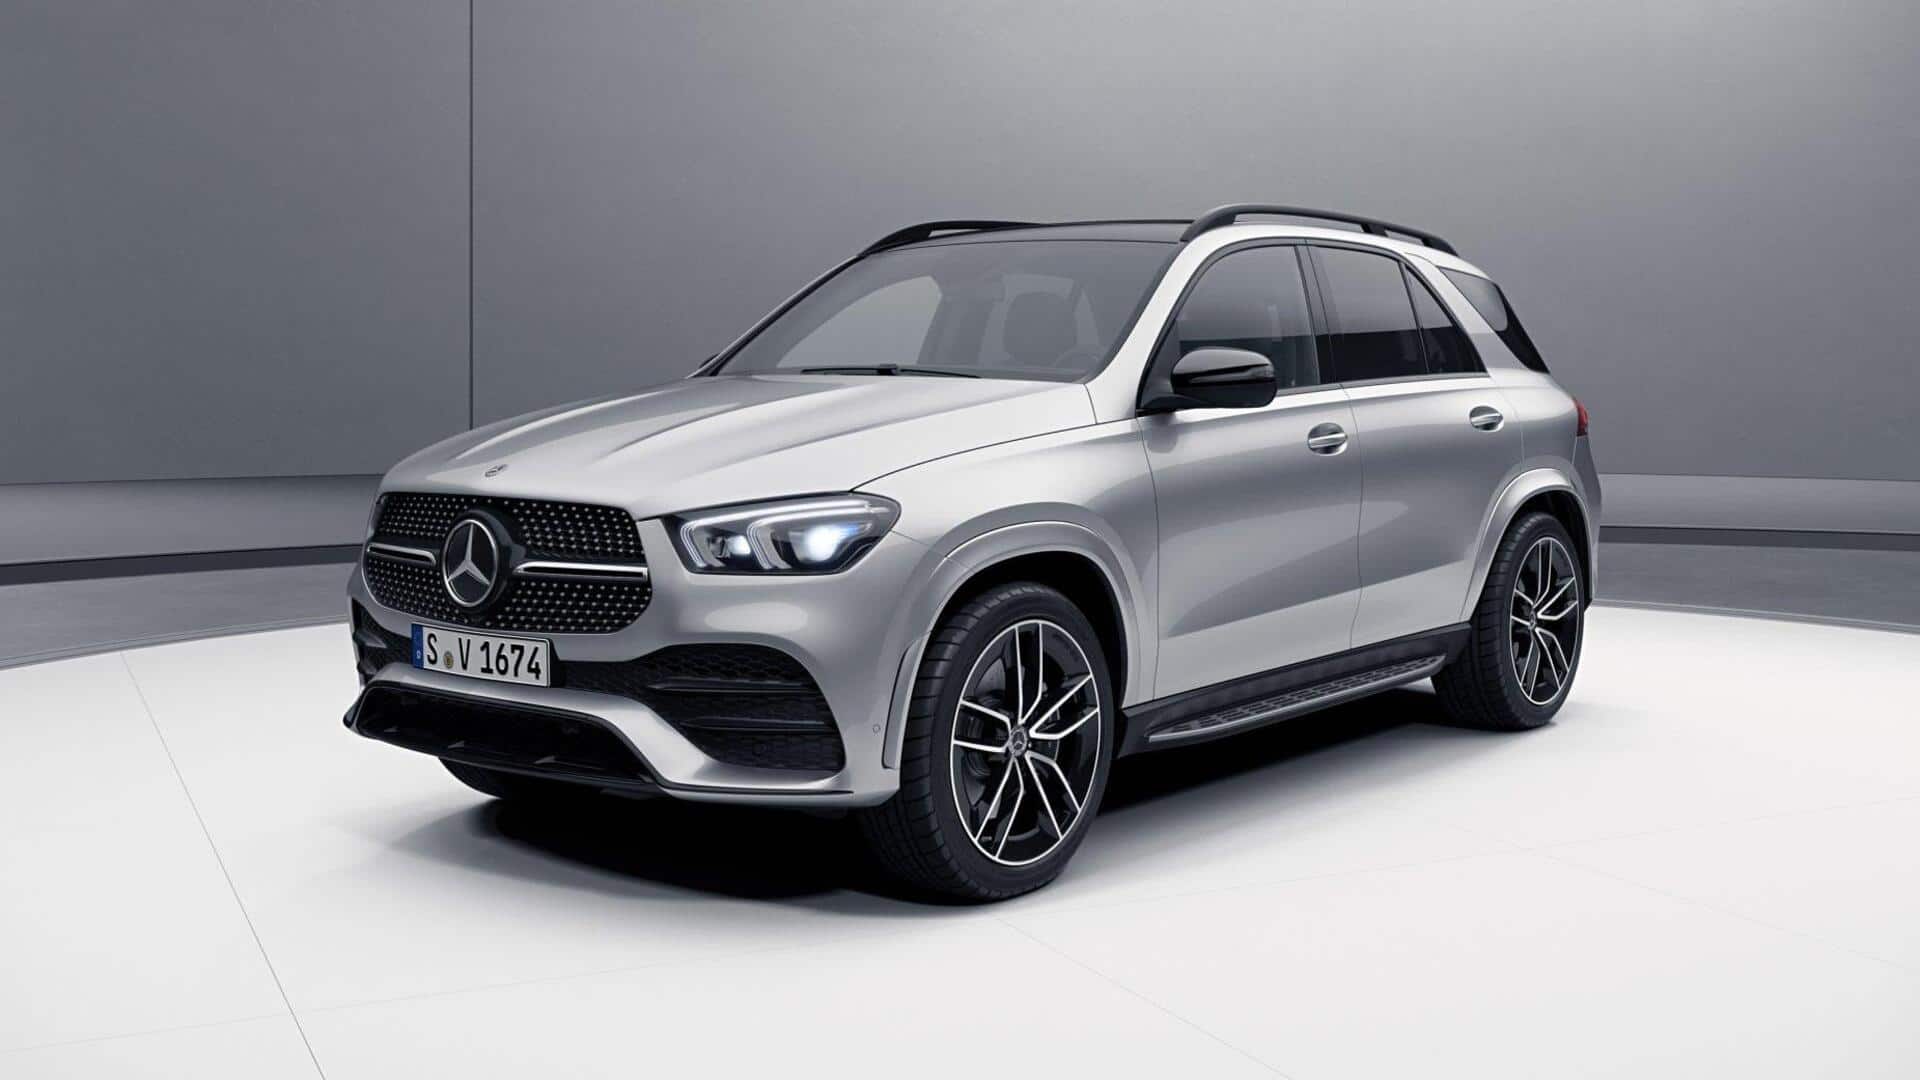 Upcoming cars in November: Tata Punch, Mercedes-Benz GLE, and more